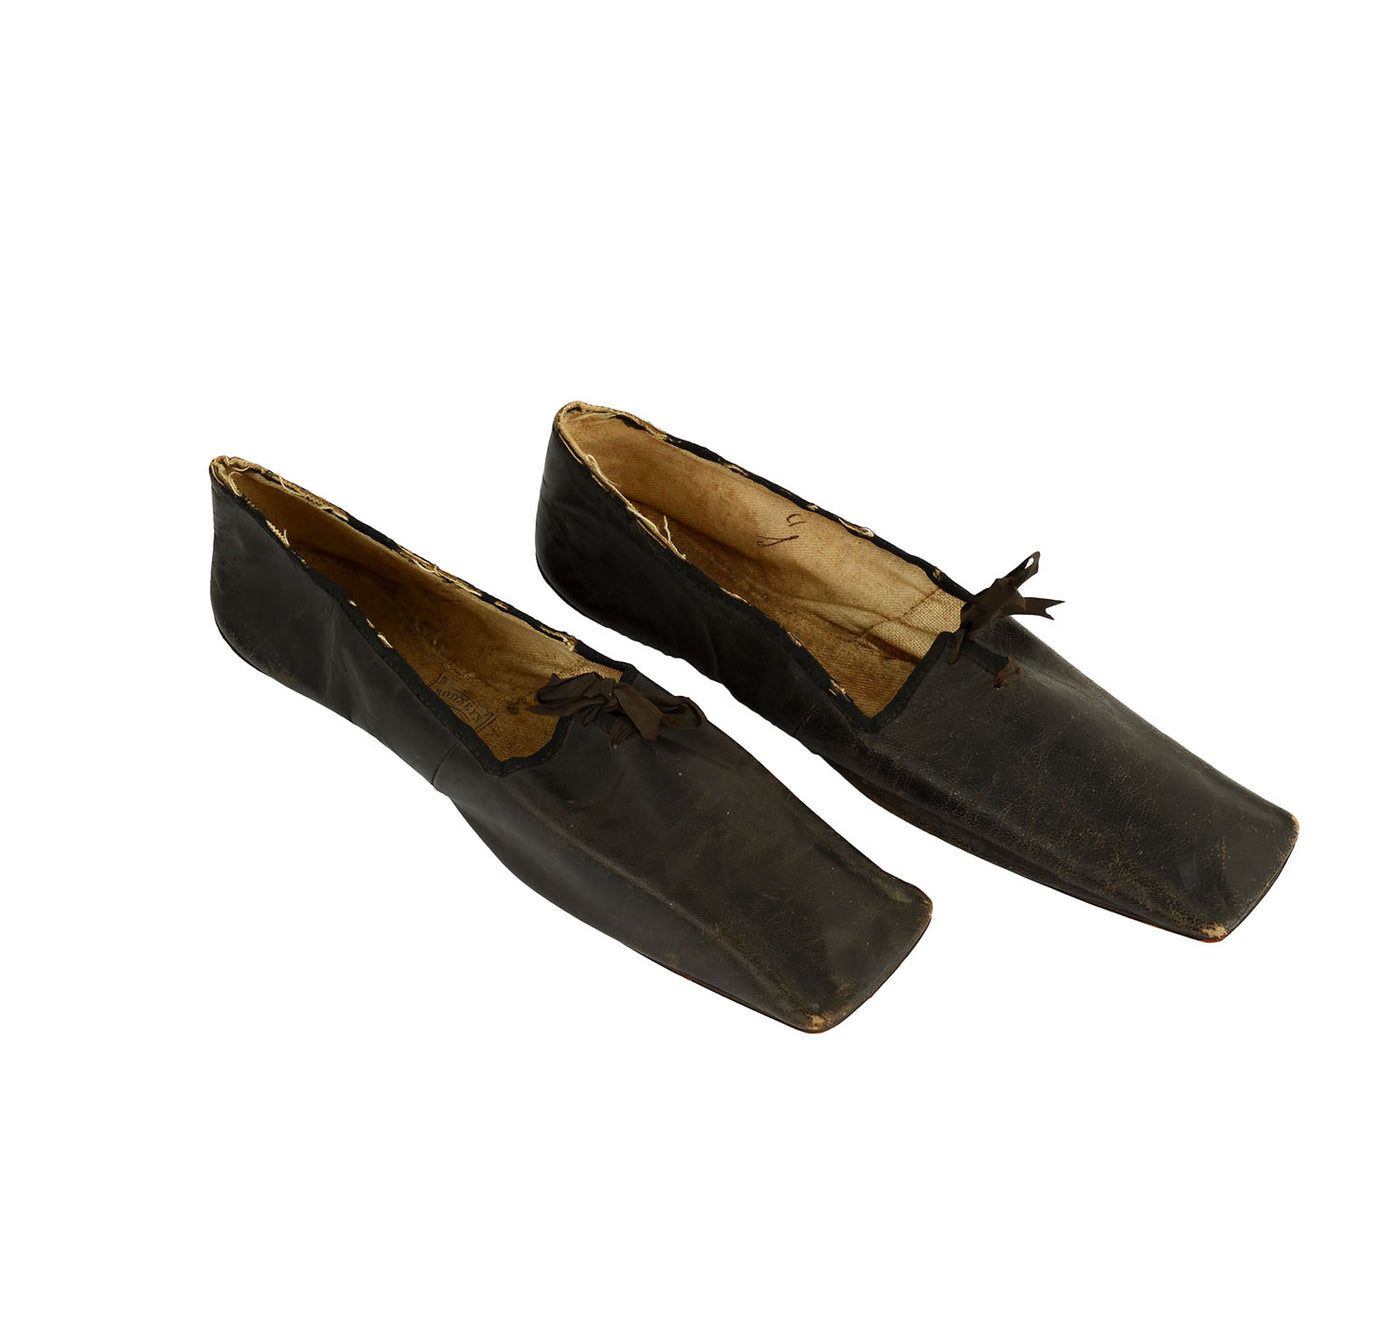 1387392-mid-19th-century-leather-shoes-with-label_77ce8cd7-3a8e-4f4b-8cfb-891fab43011f